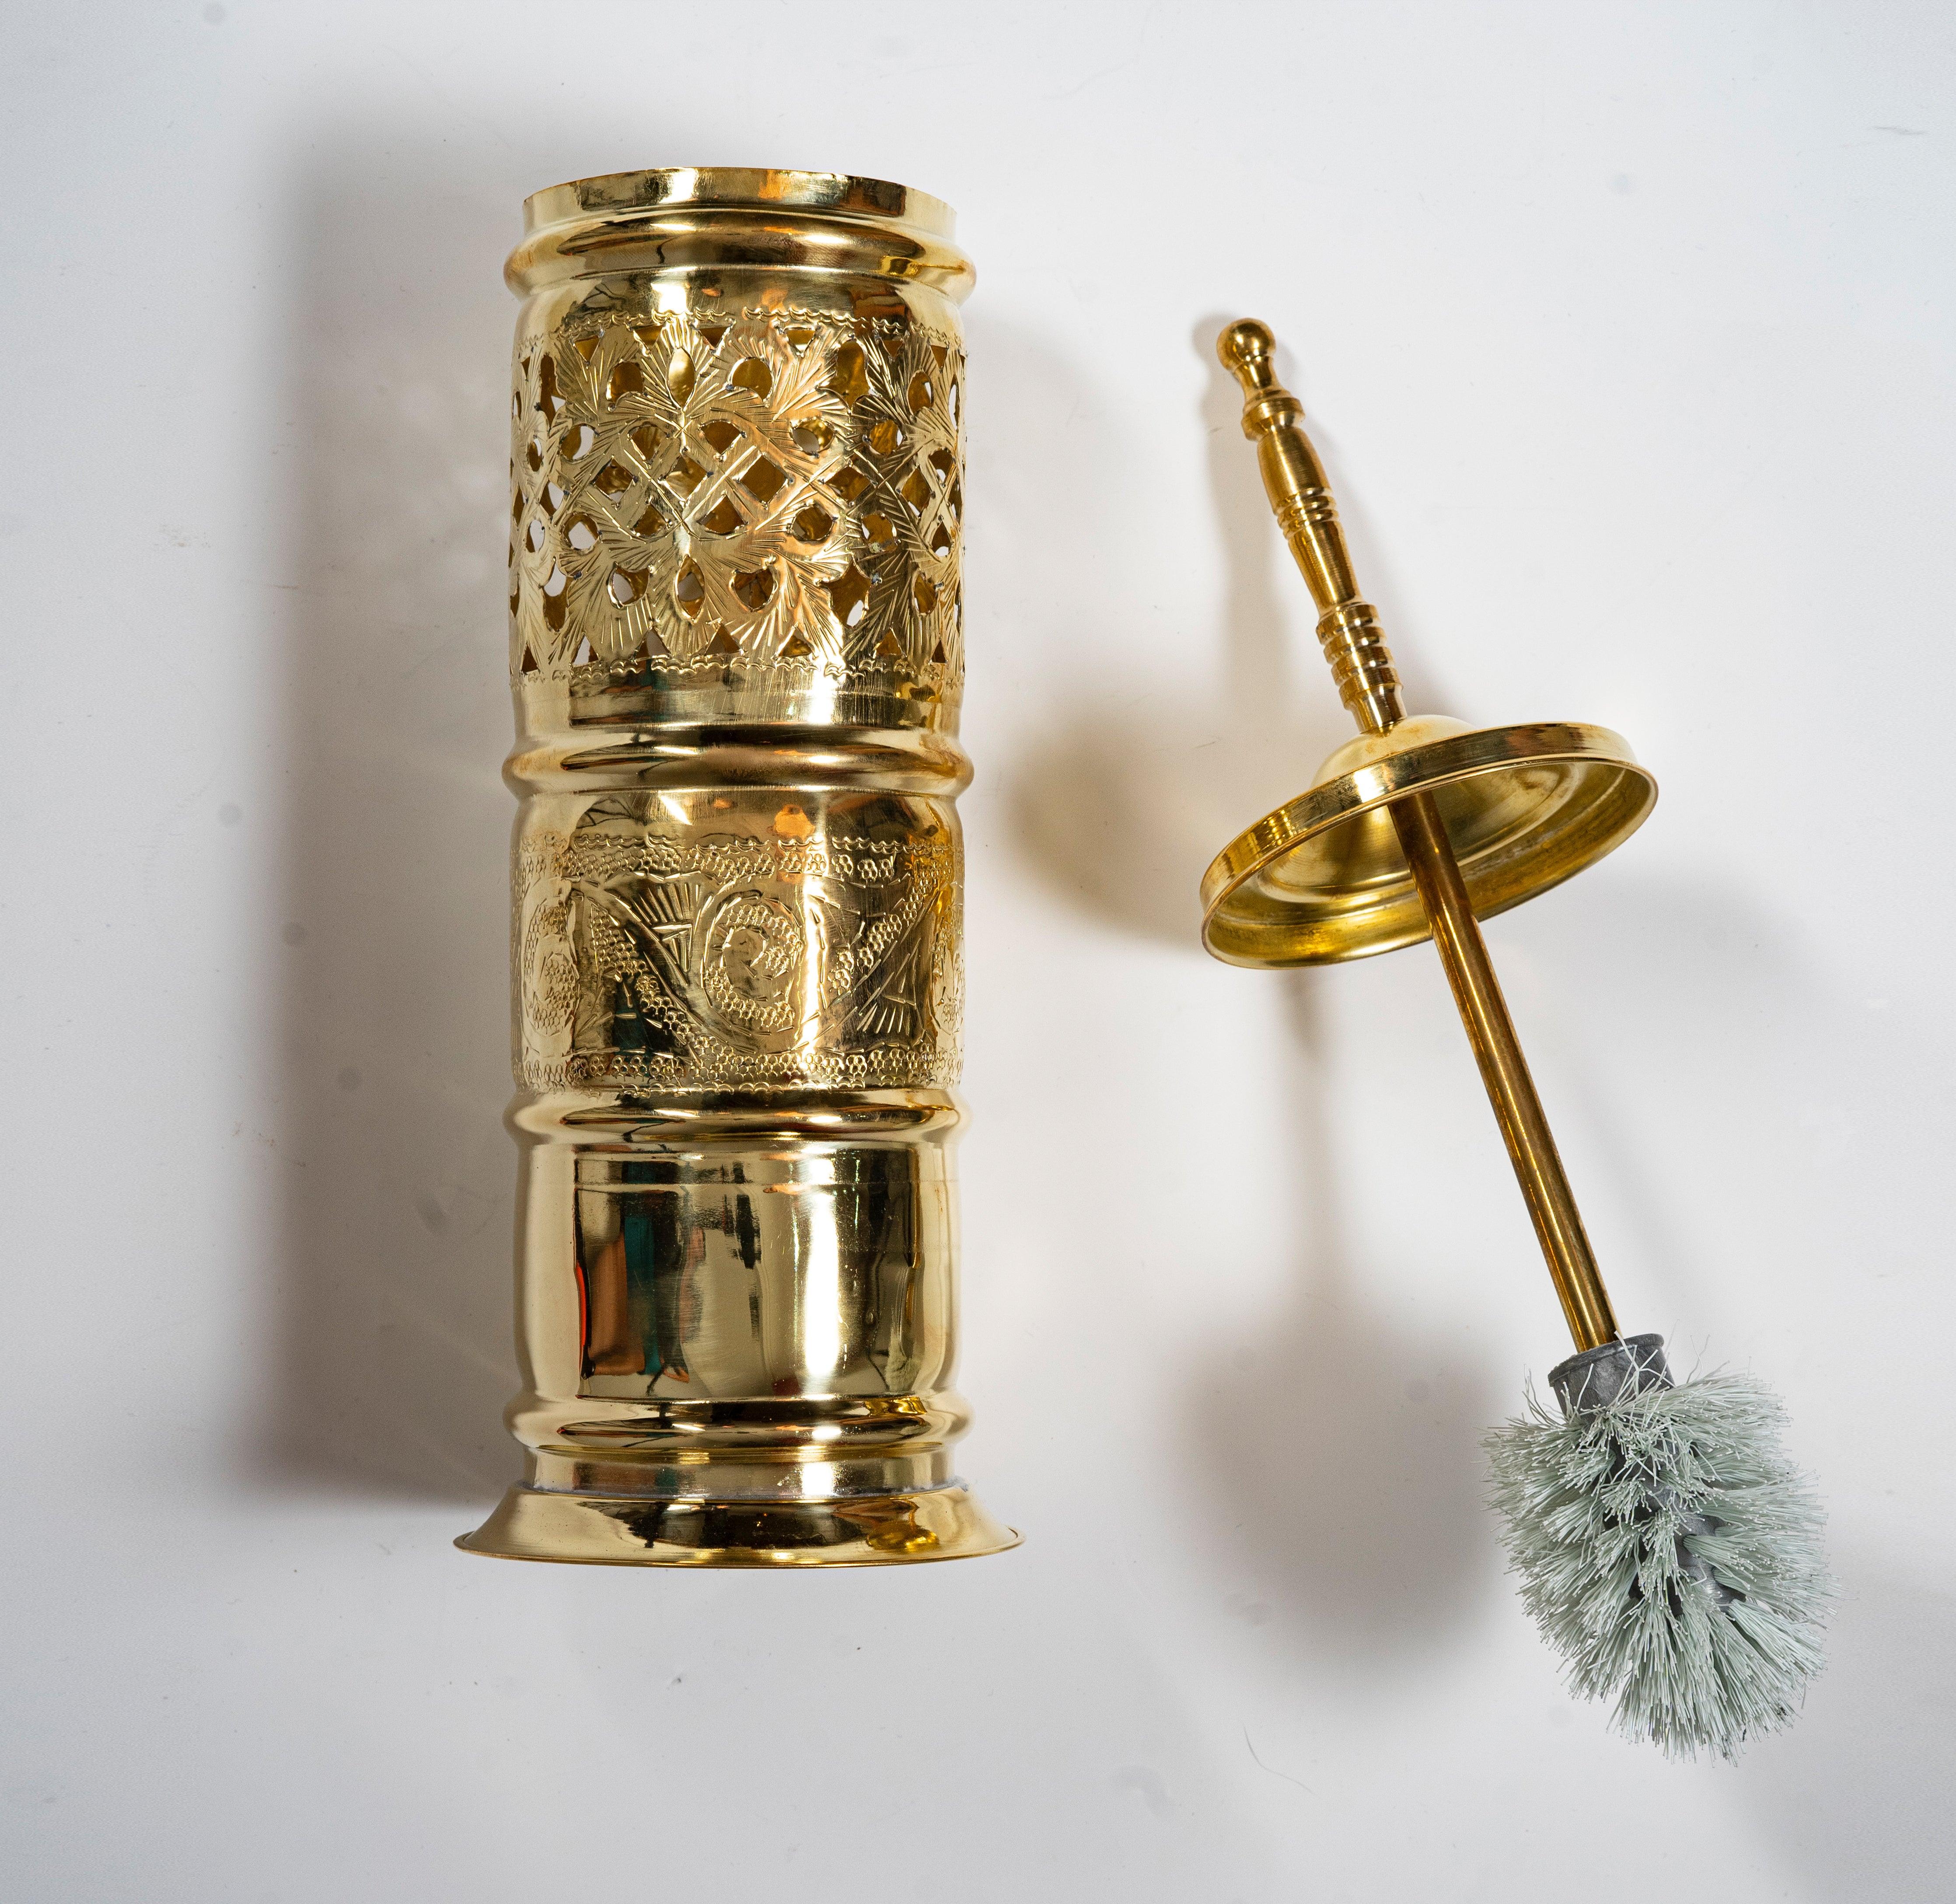 Antique Unlacquered Brass Toilet Brush - Zayian